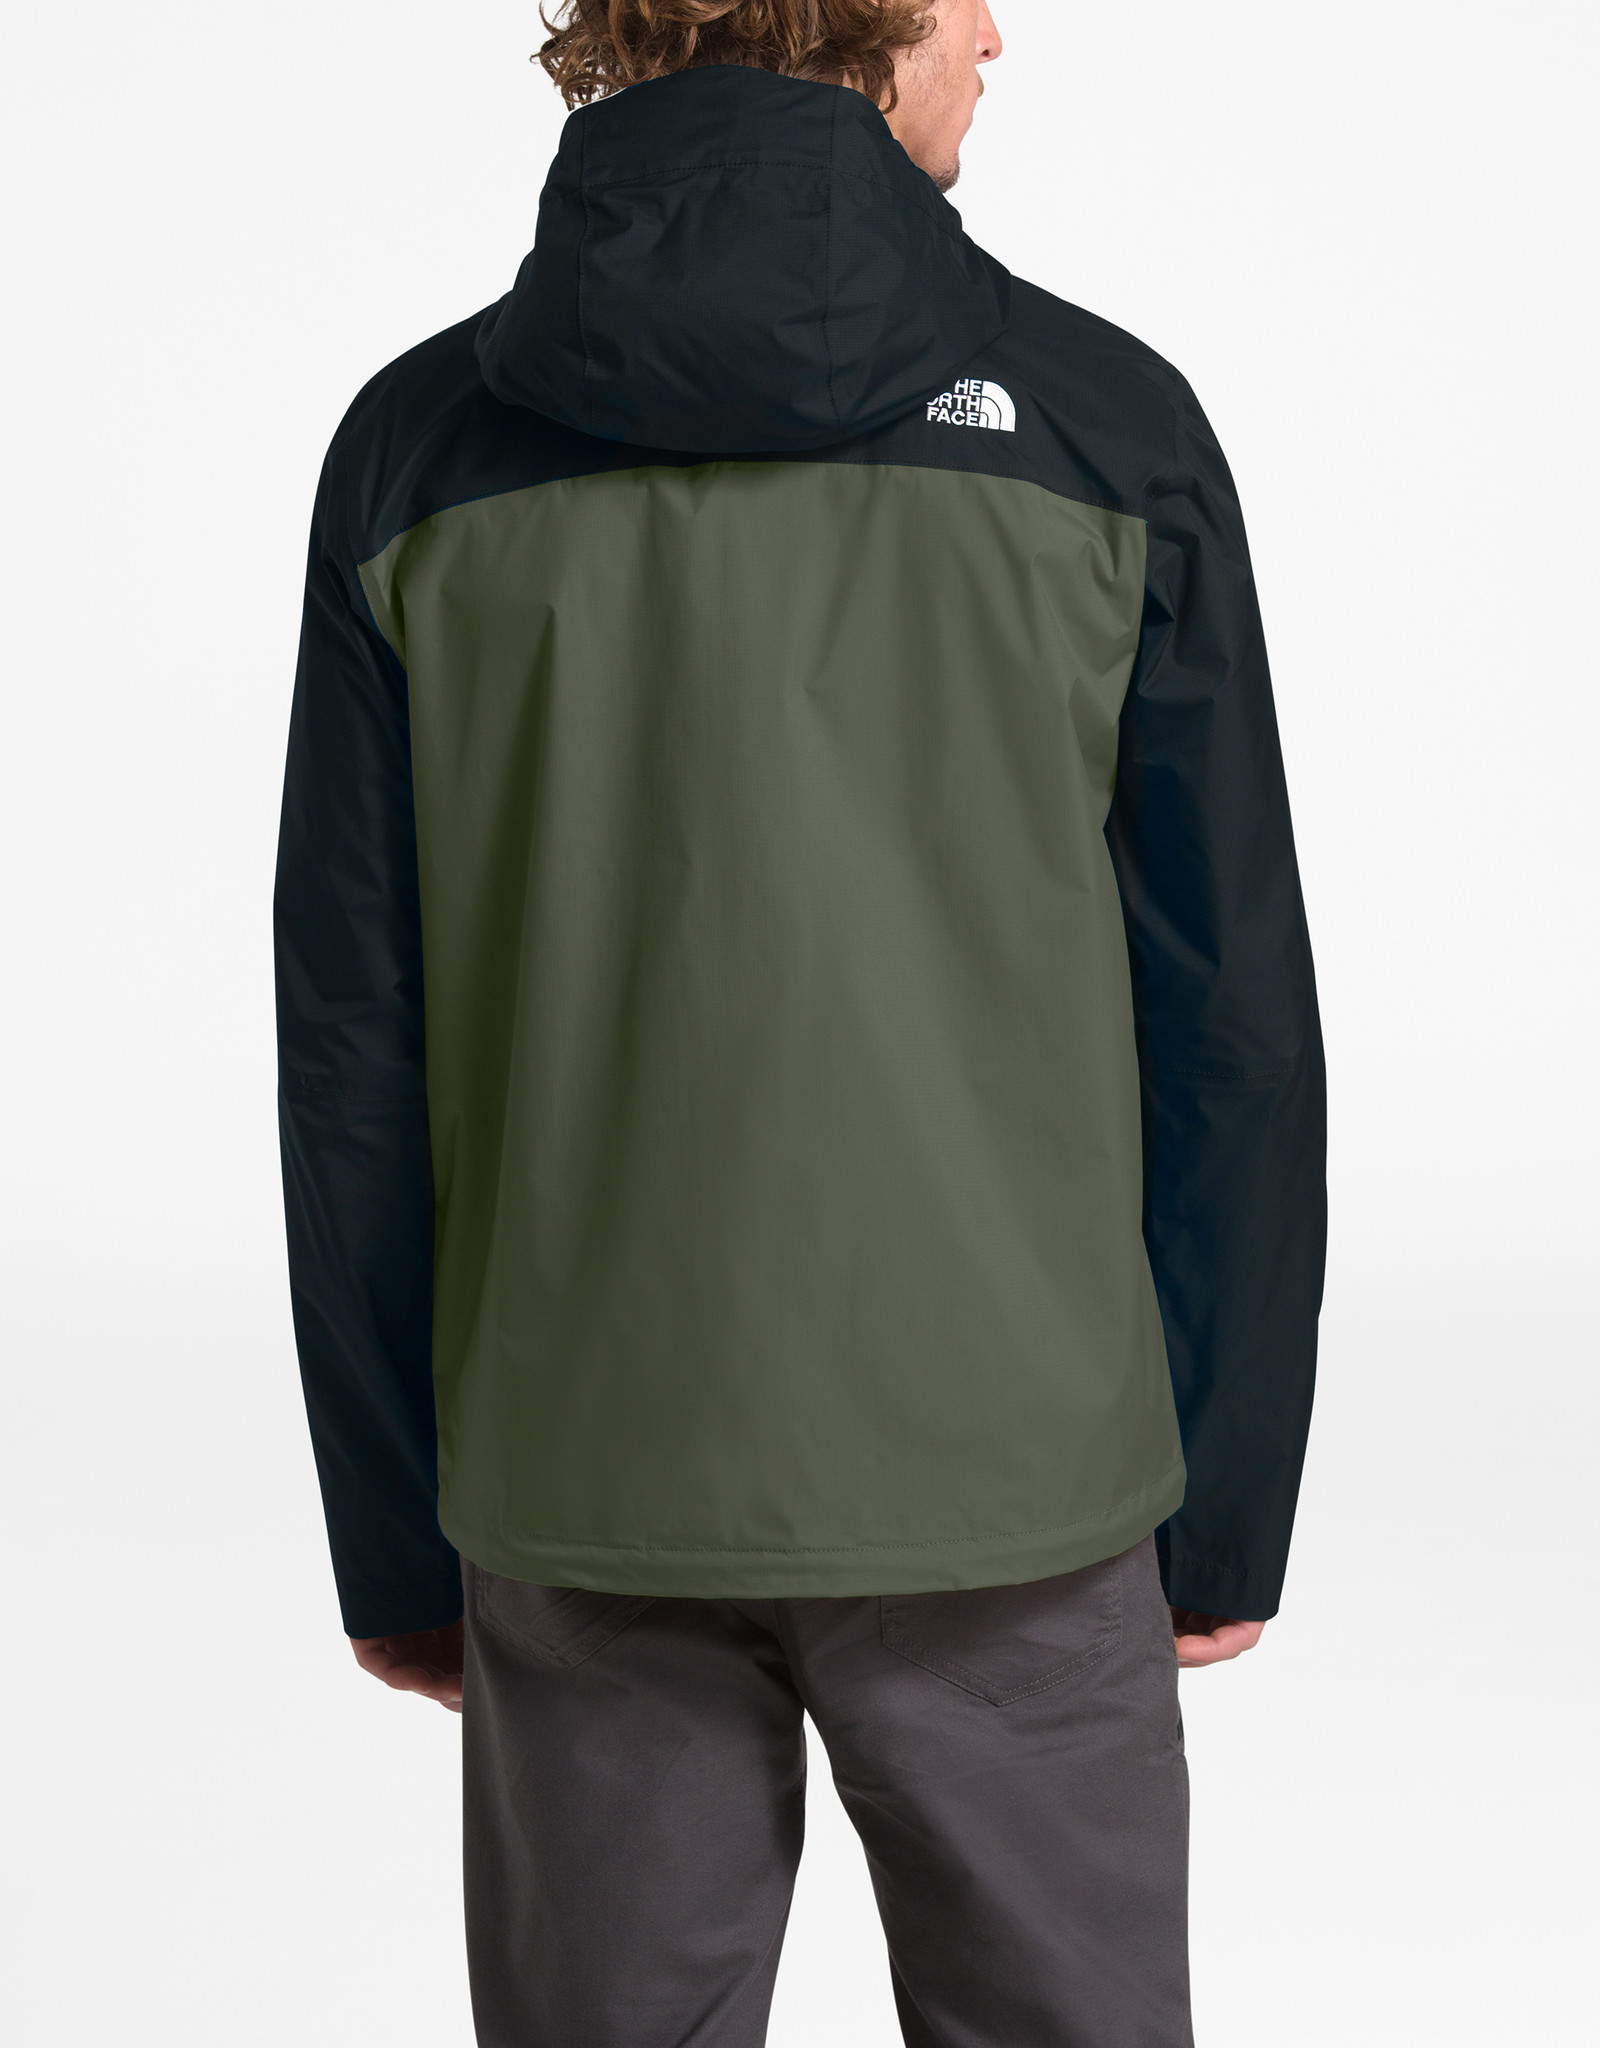 The North Face The North Face Men’s Venture 2 Jacket - S2020